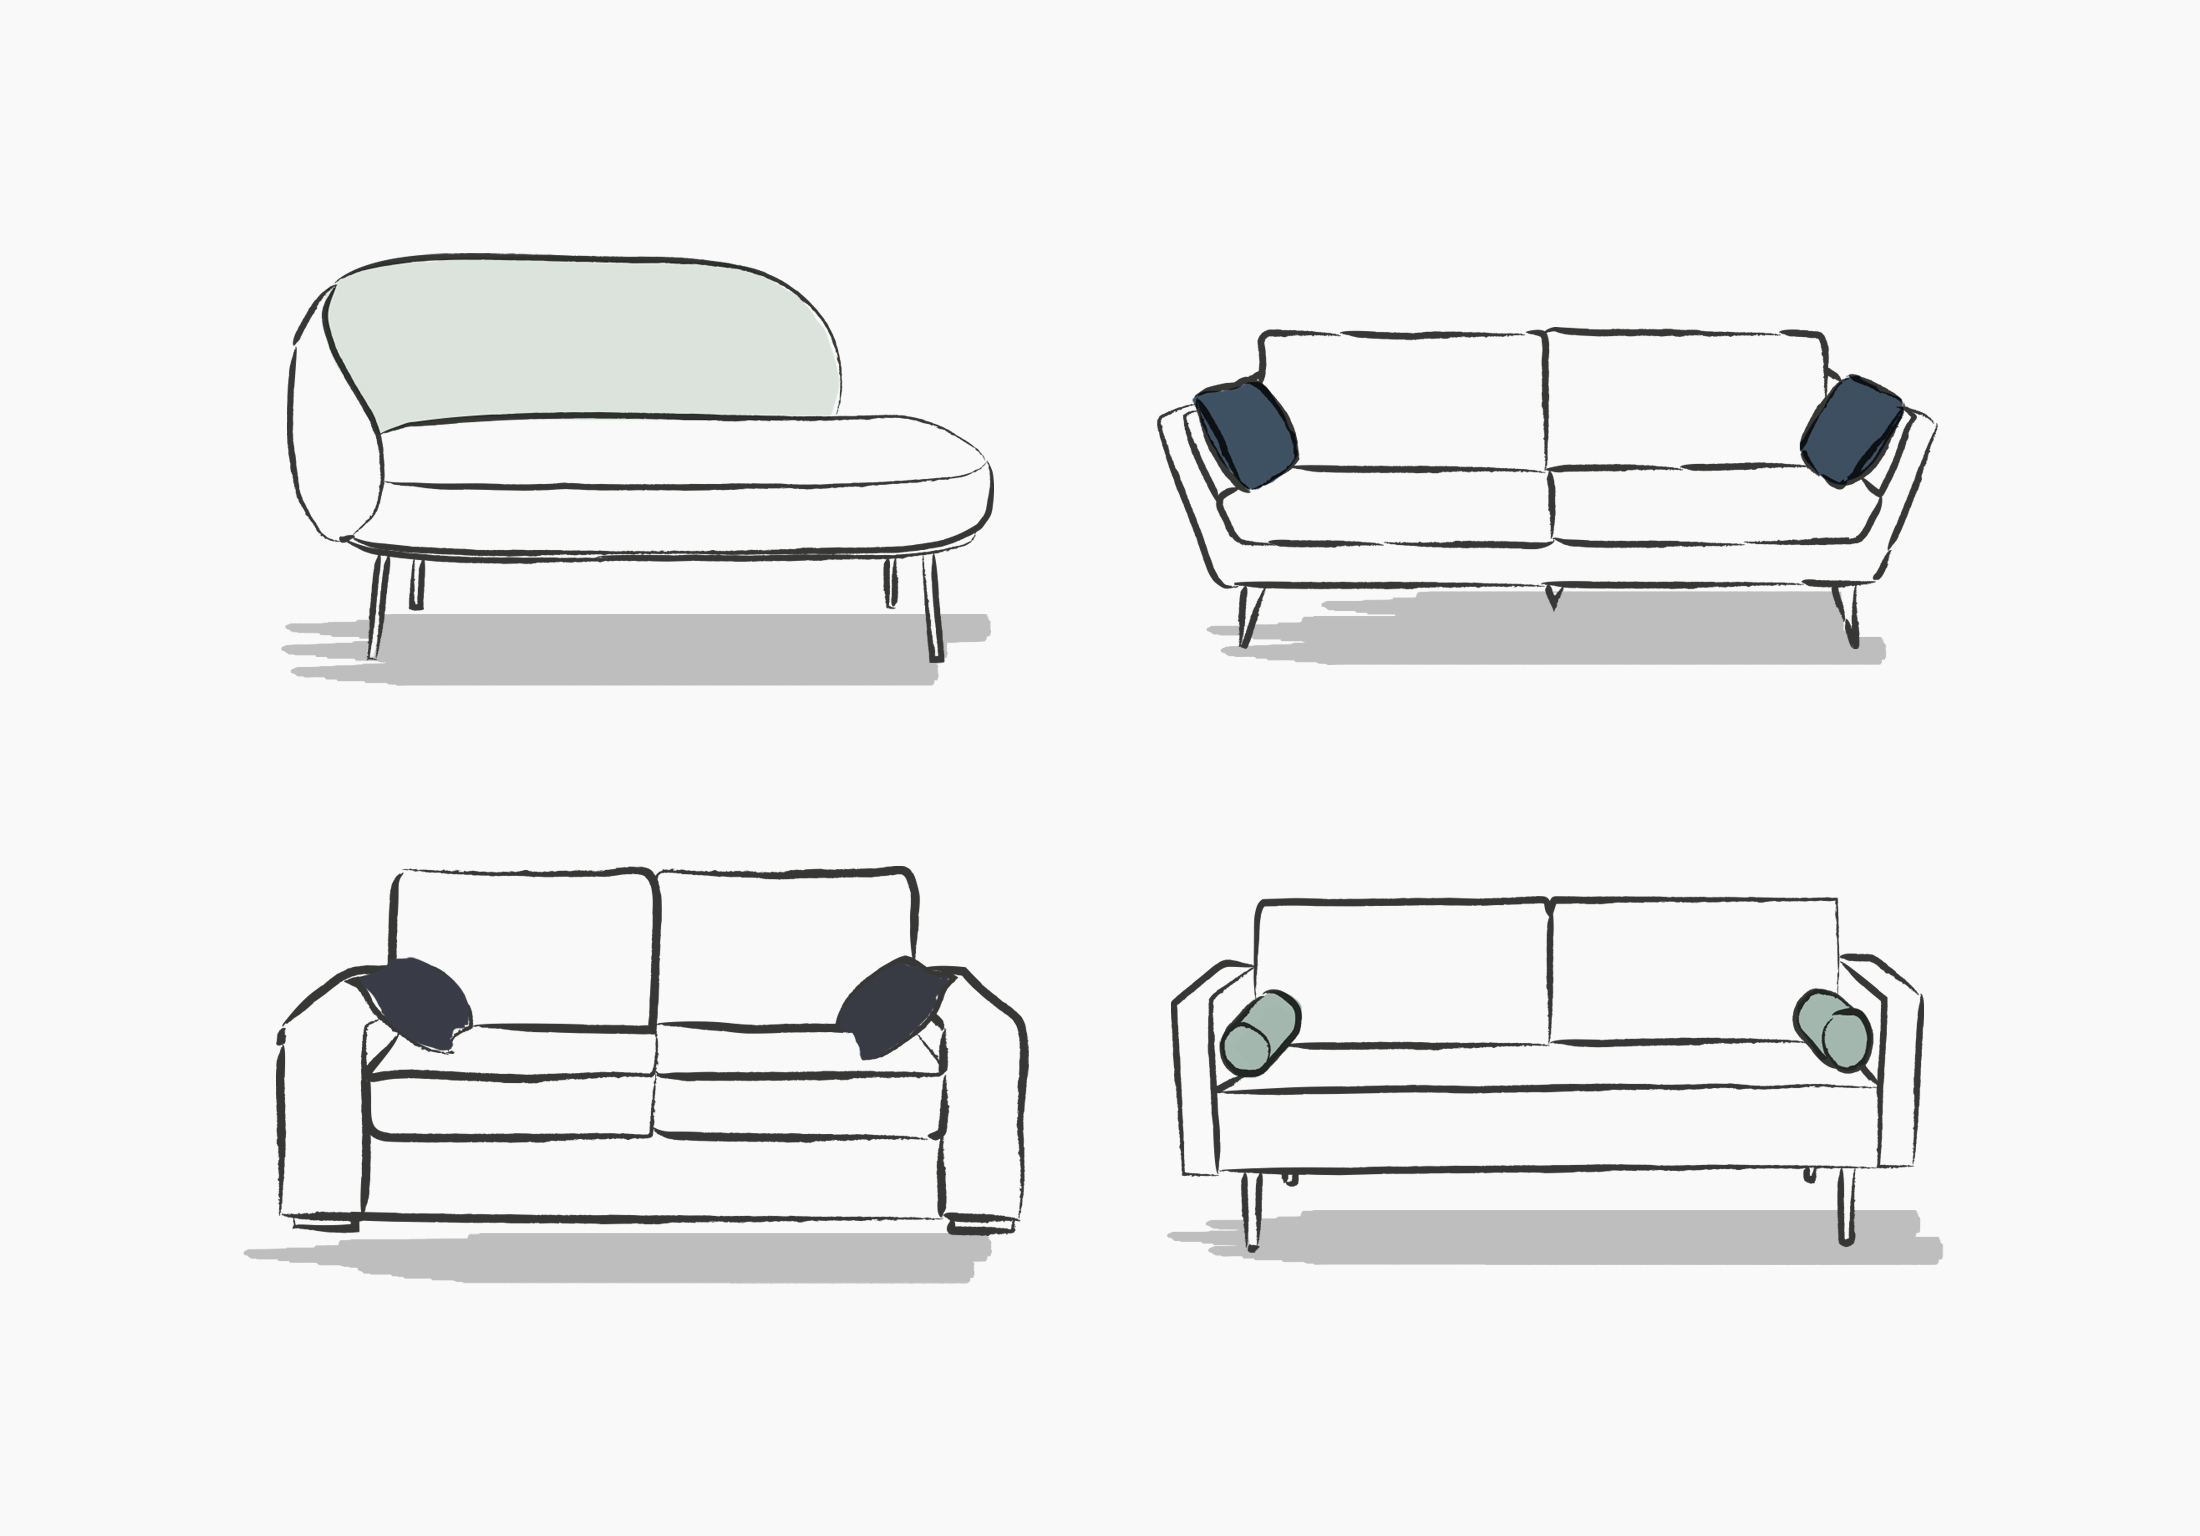 The TIPTOE sofa (update #1): we have more to tell you about it!